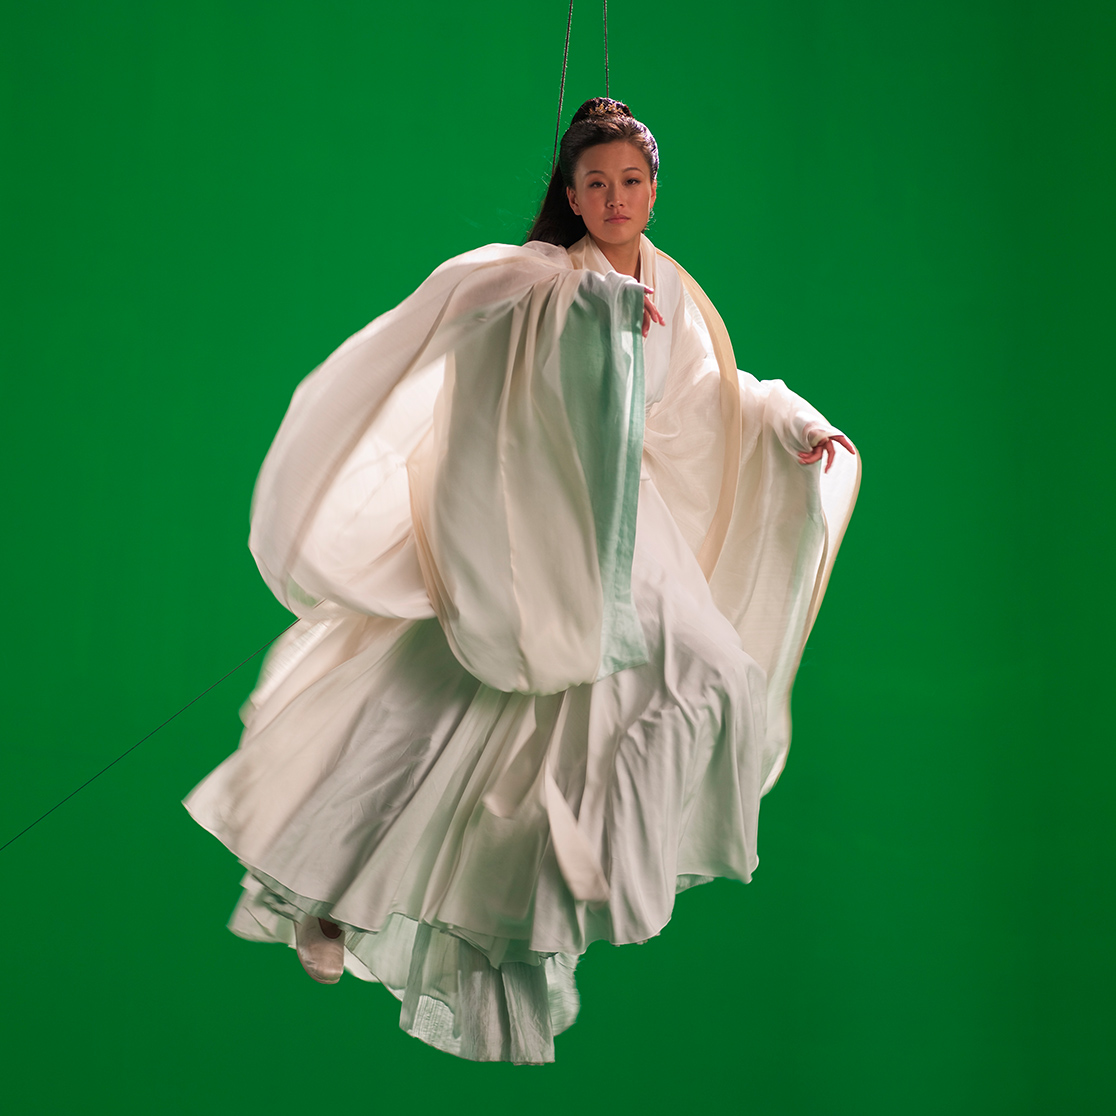 A woman dressed in floaty white fabric is pictured, she is suspended by wires in front of a green screen